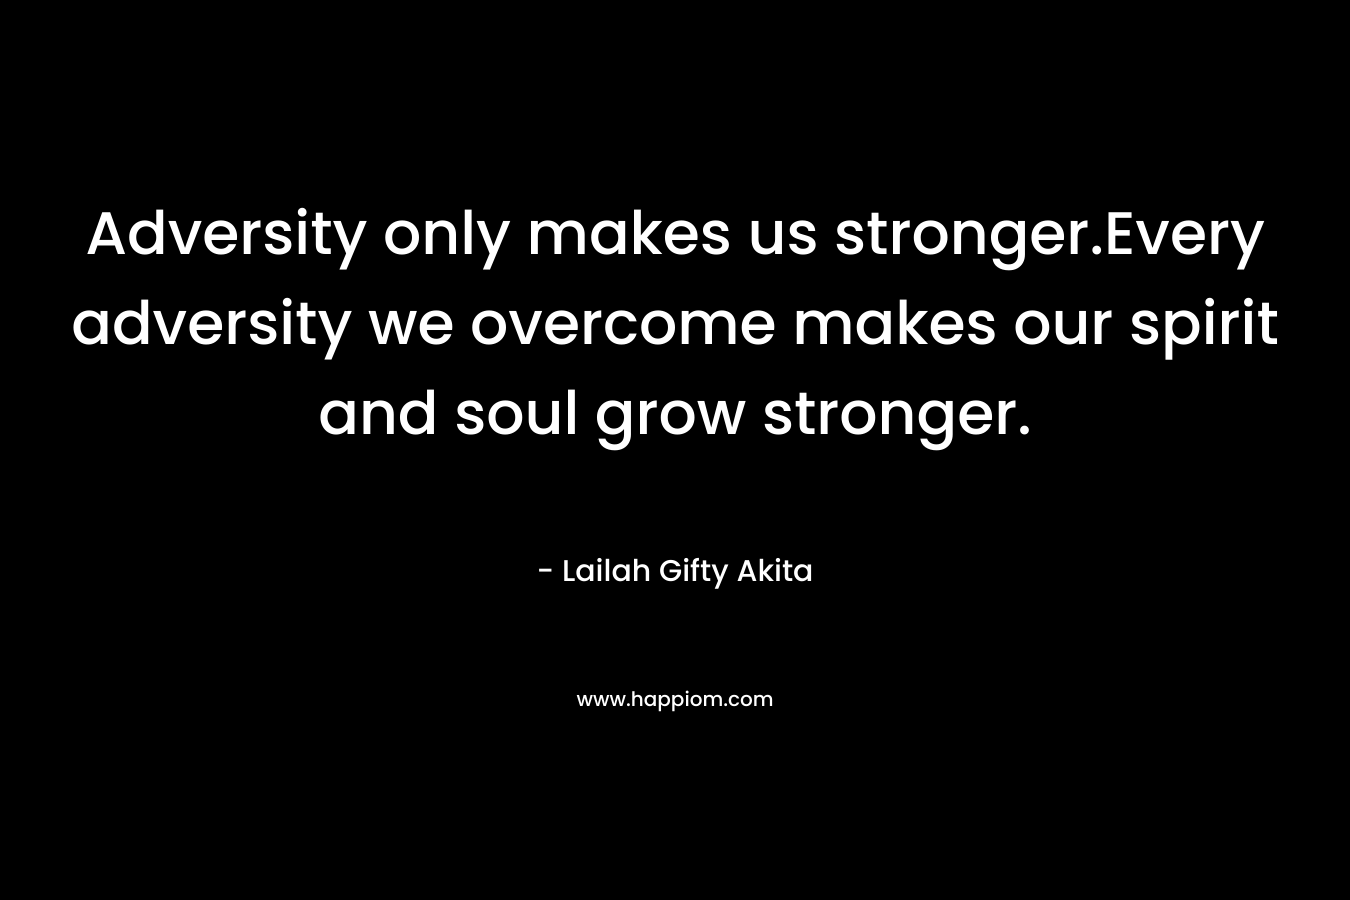 Adversity only makes us stronger.Every adversity we overcome makes our spirit and soul grow stronger. – Lailah Gifty Akita